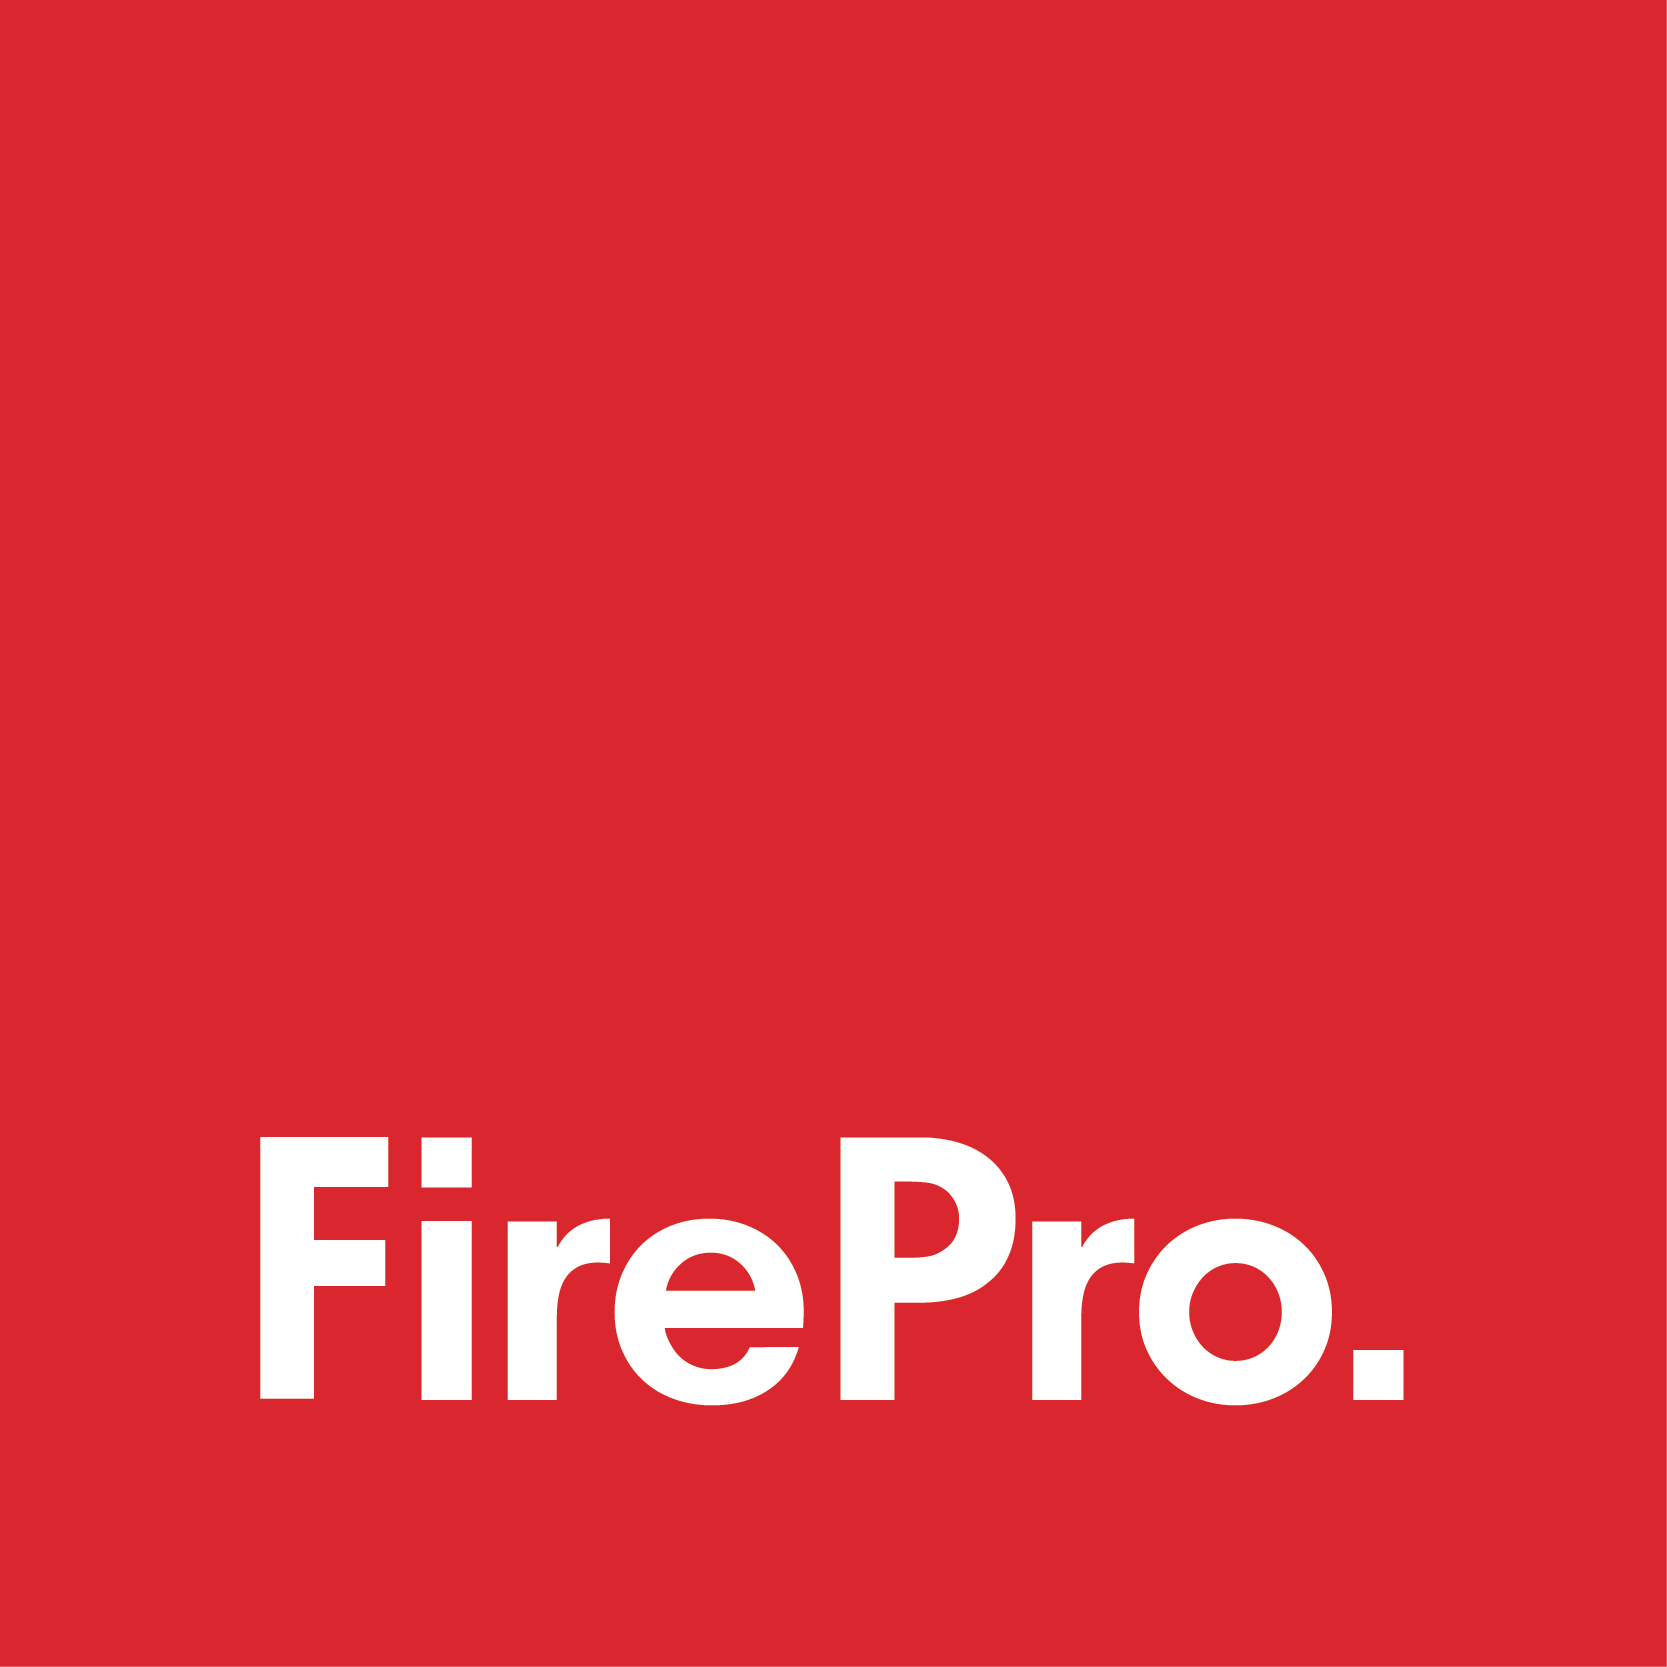 Reinventing #FireSuppression while caring for people & #Environment. Certified by @isostandards, @ULdialogue & @EPA #FirePro protects assets in 110 countries.